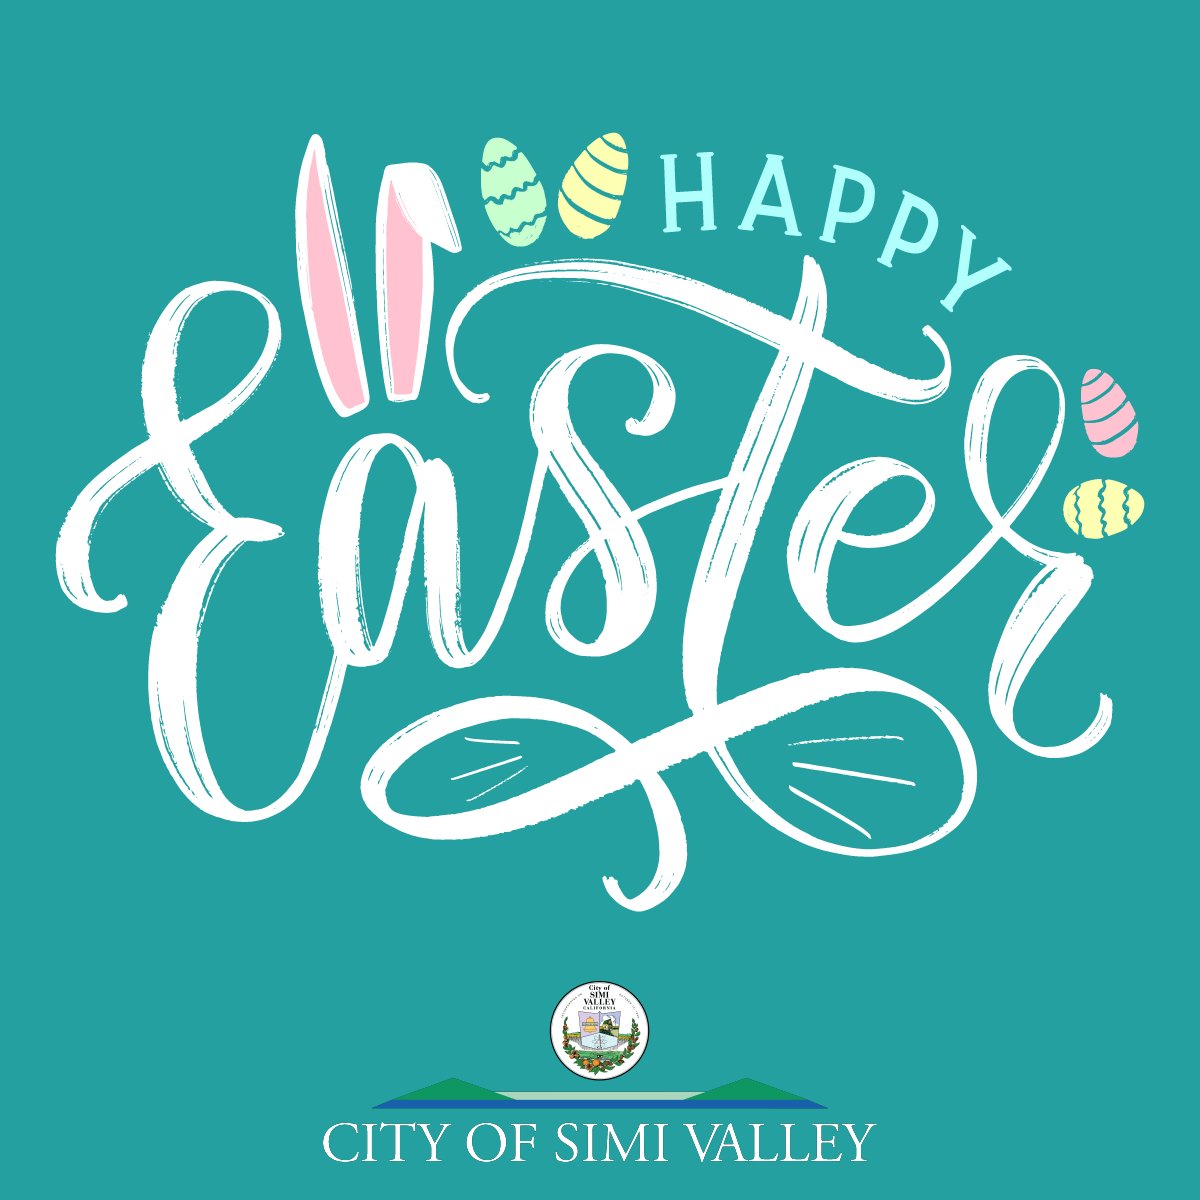 Wishing you a Happy Easter from the City of Simi Valley